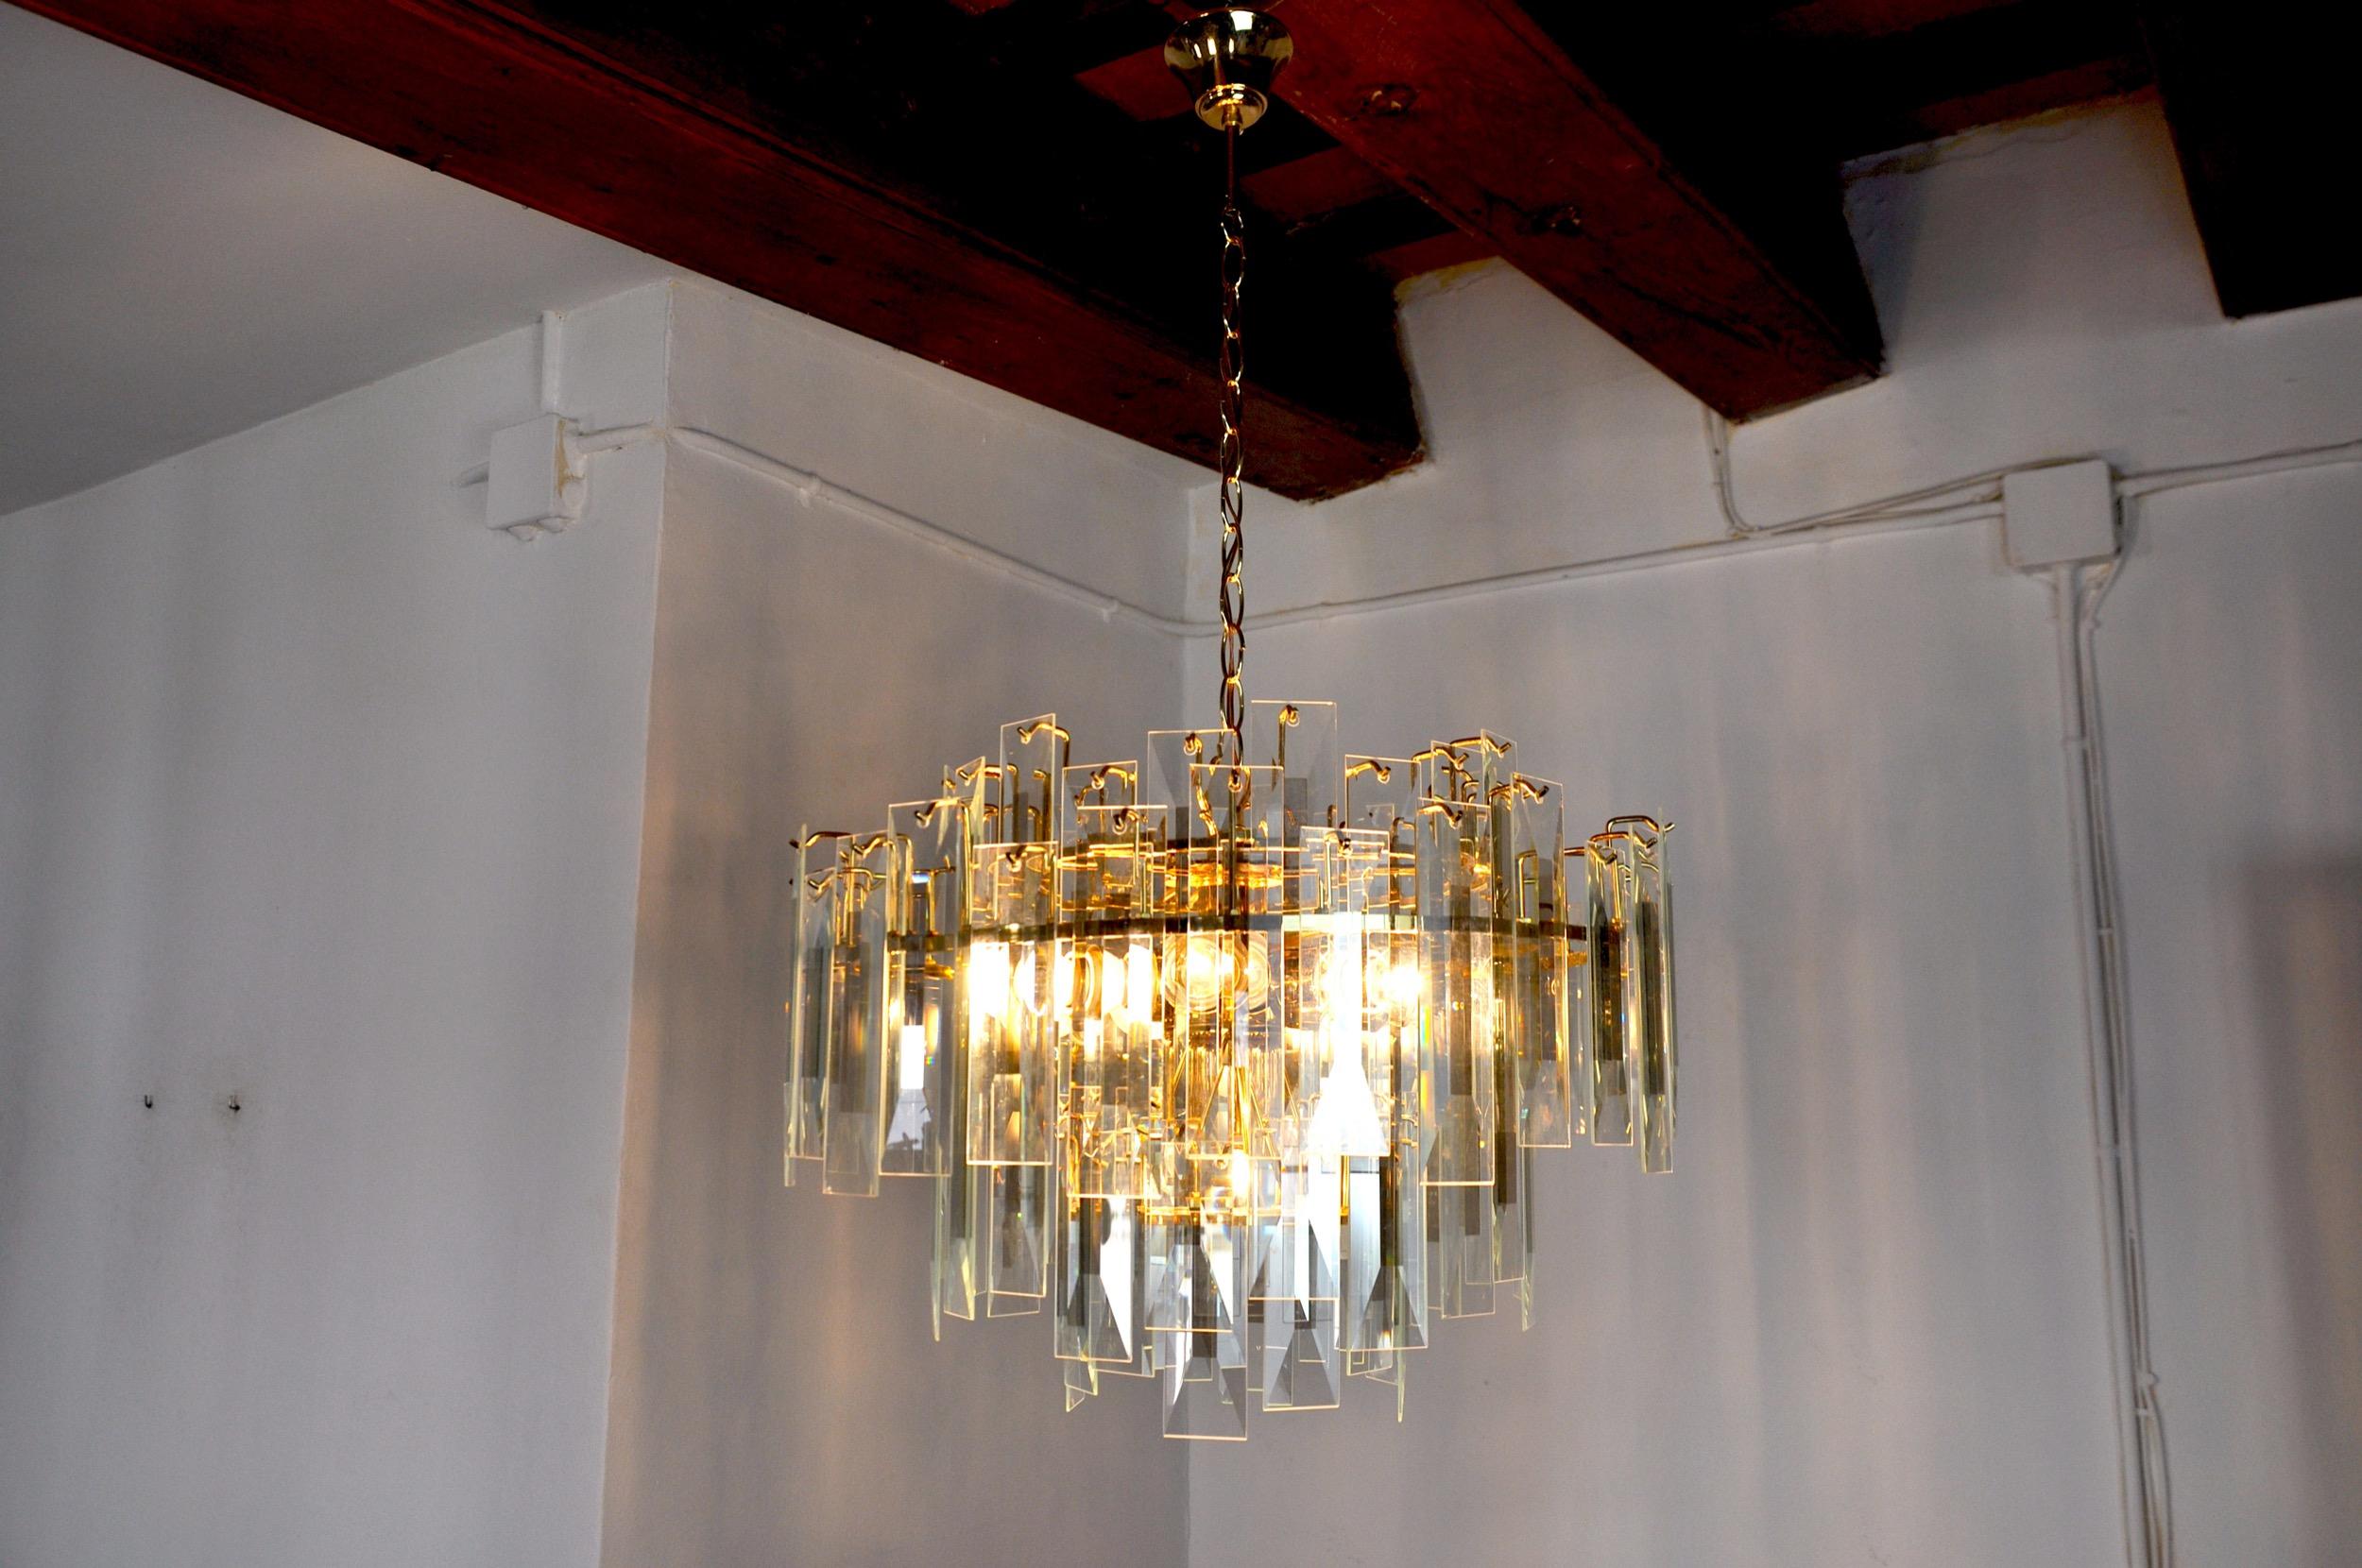 Superb venini chandelier designed and produced in italy in the 70s.

Beveled crystals distributed on a gilded metal structure.

Unique object that will illuminate wonderfully and bring a real design touch to your interior.

Verified